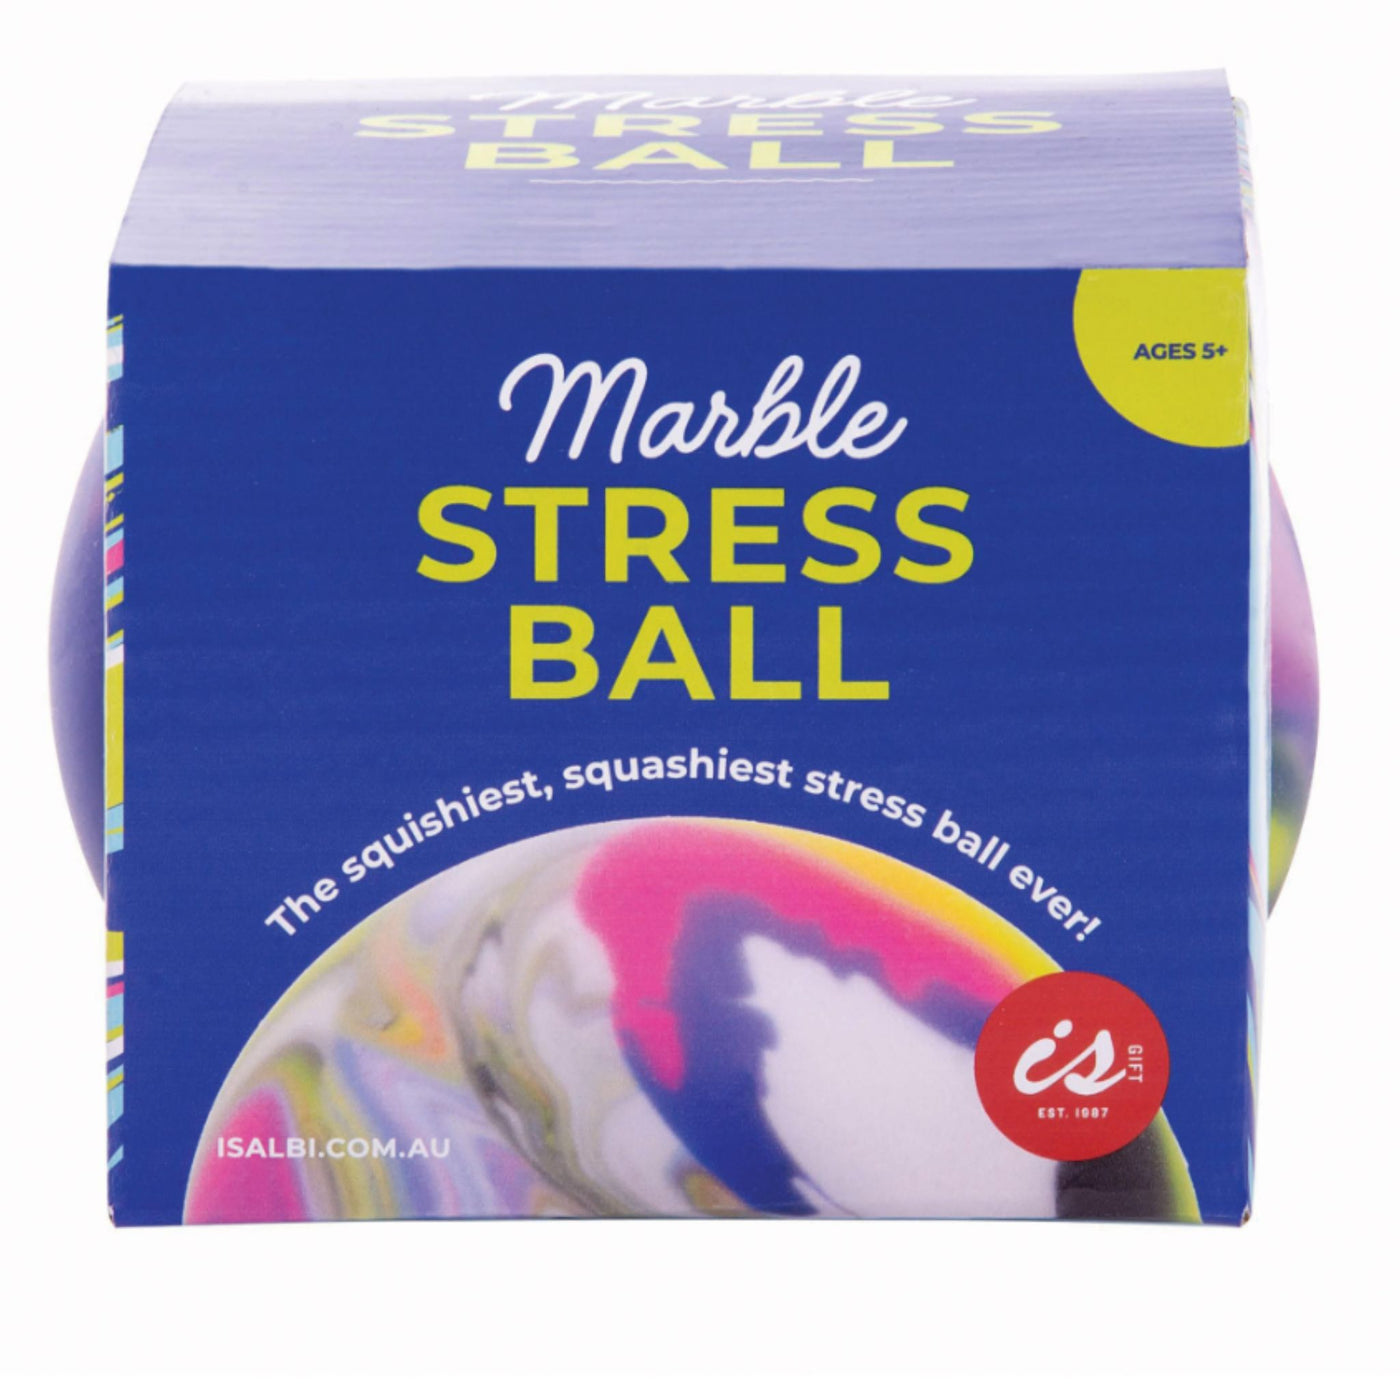 Magnificent Marble Stress Ball